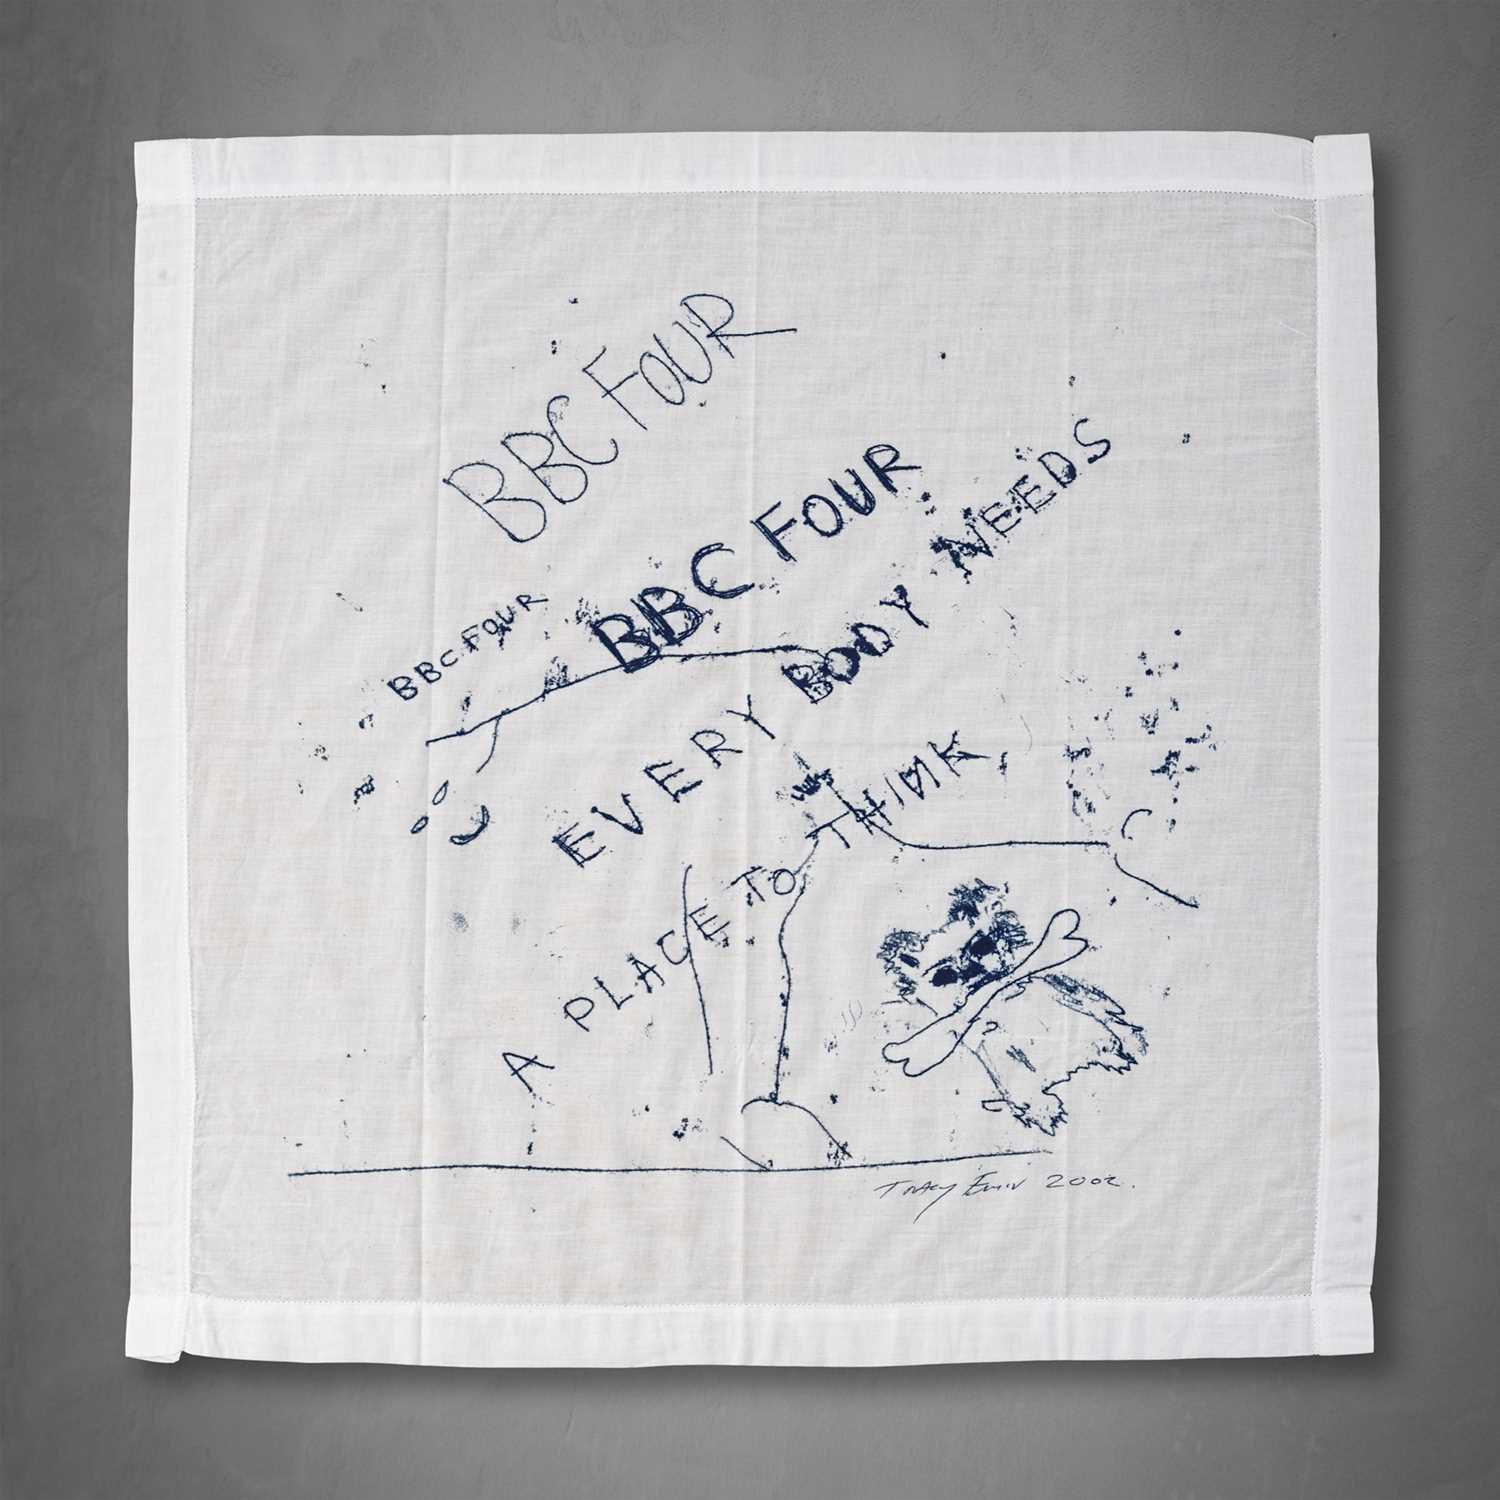 Lot 81 - Tracey Emin (British 1963-), 'Everybody Needs A Place To Think', 2002